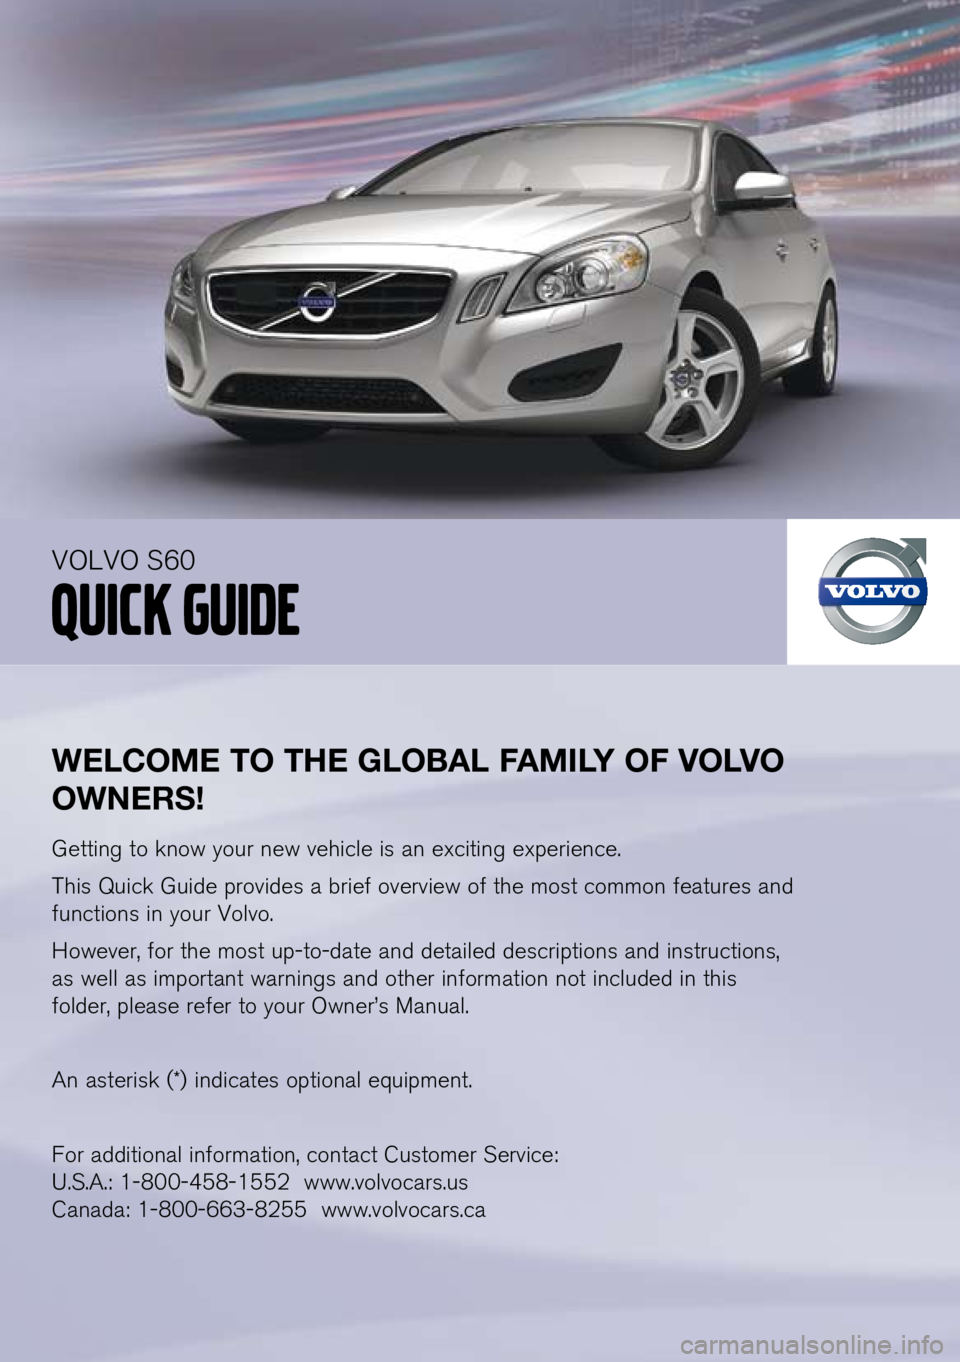 VOLVO S60 2012  Quick Guide 
WElCOME TO THE G lOBA l FAMI lY OF  vO lv O 
OWNERS!
Getting to know your new vehicle is an exciting experience.
This Quick Guide provides a brief overview of the most common features and 
functions 